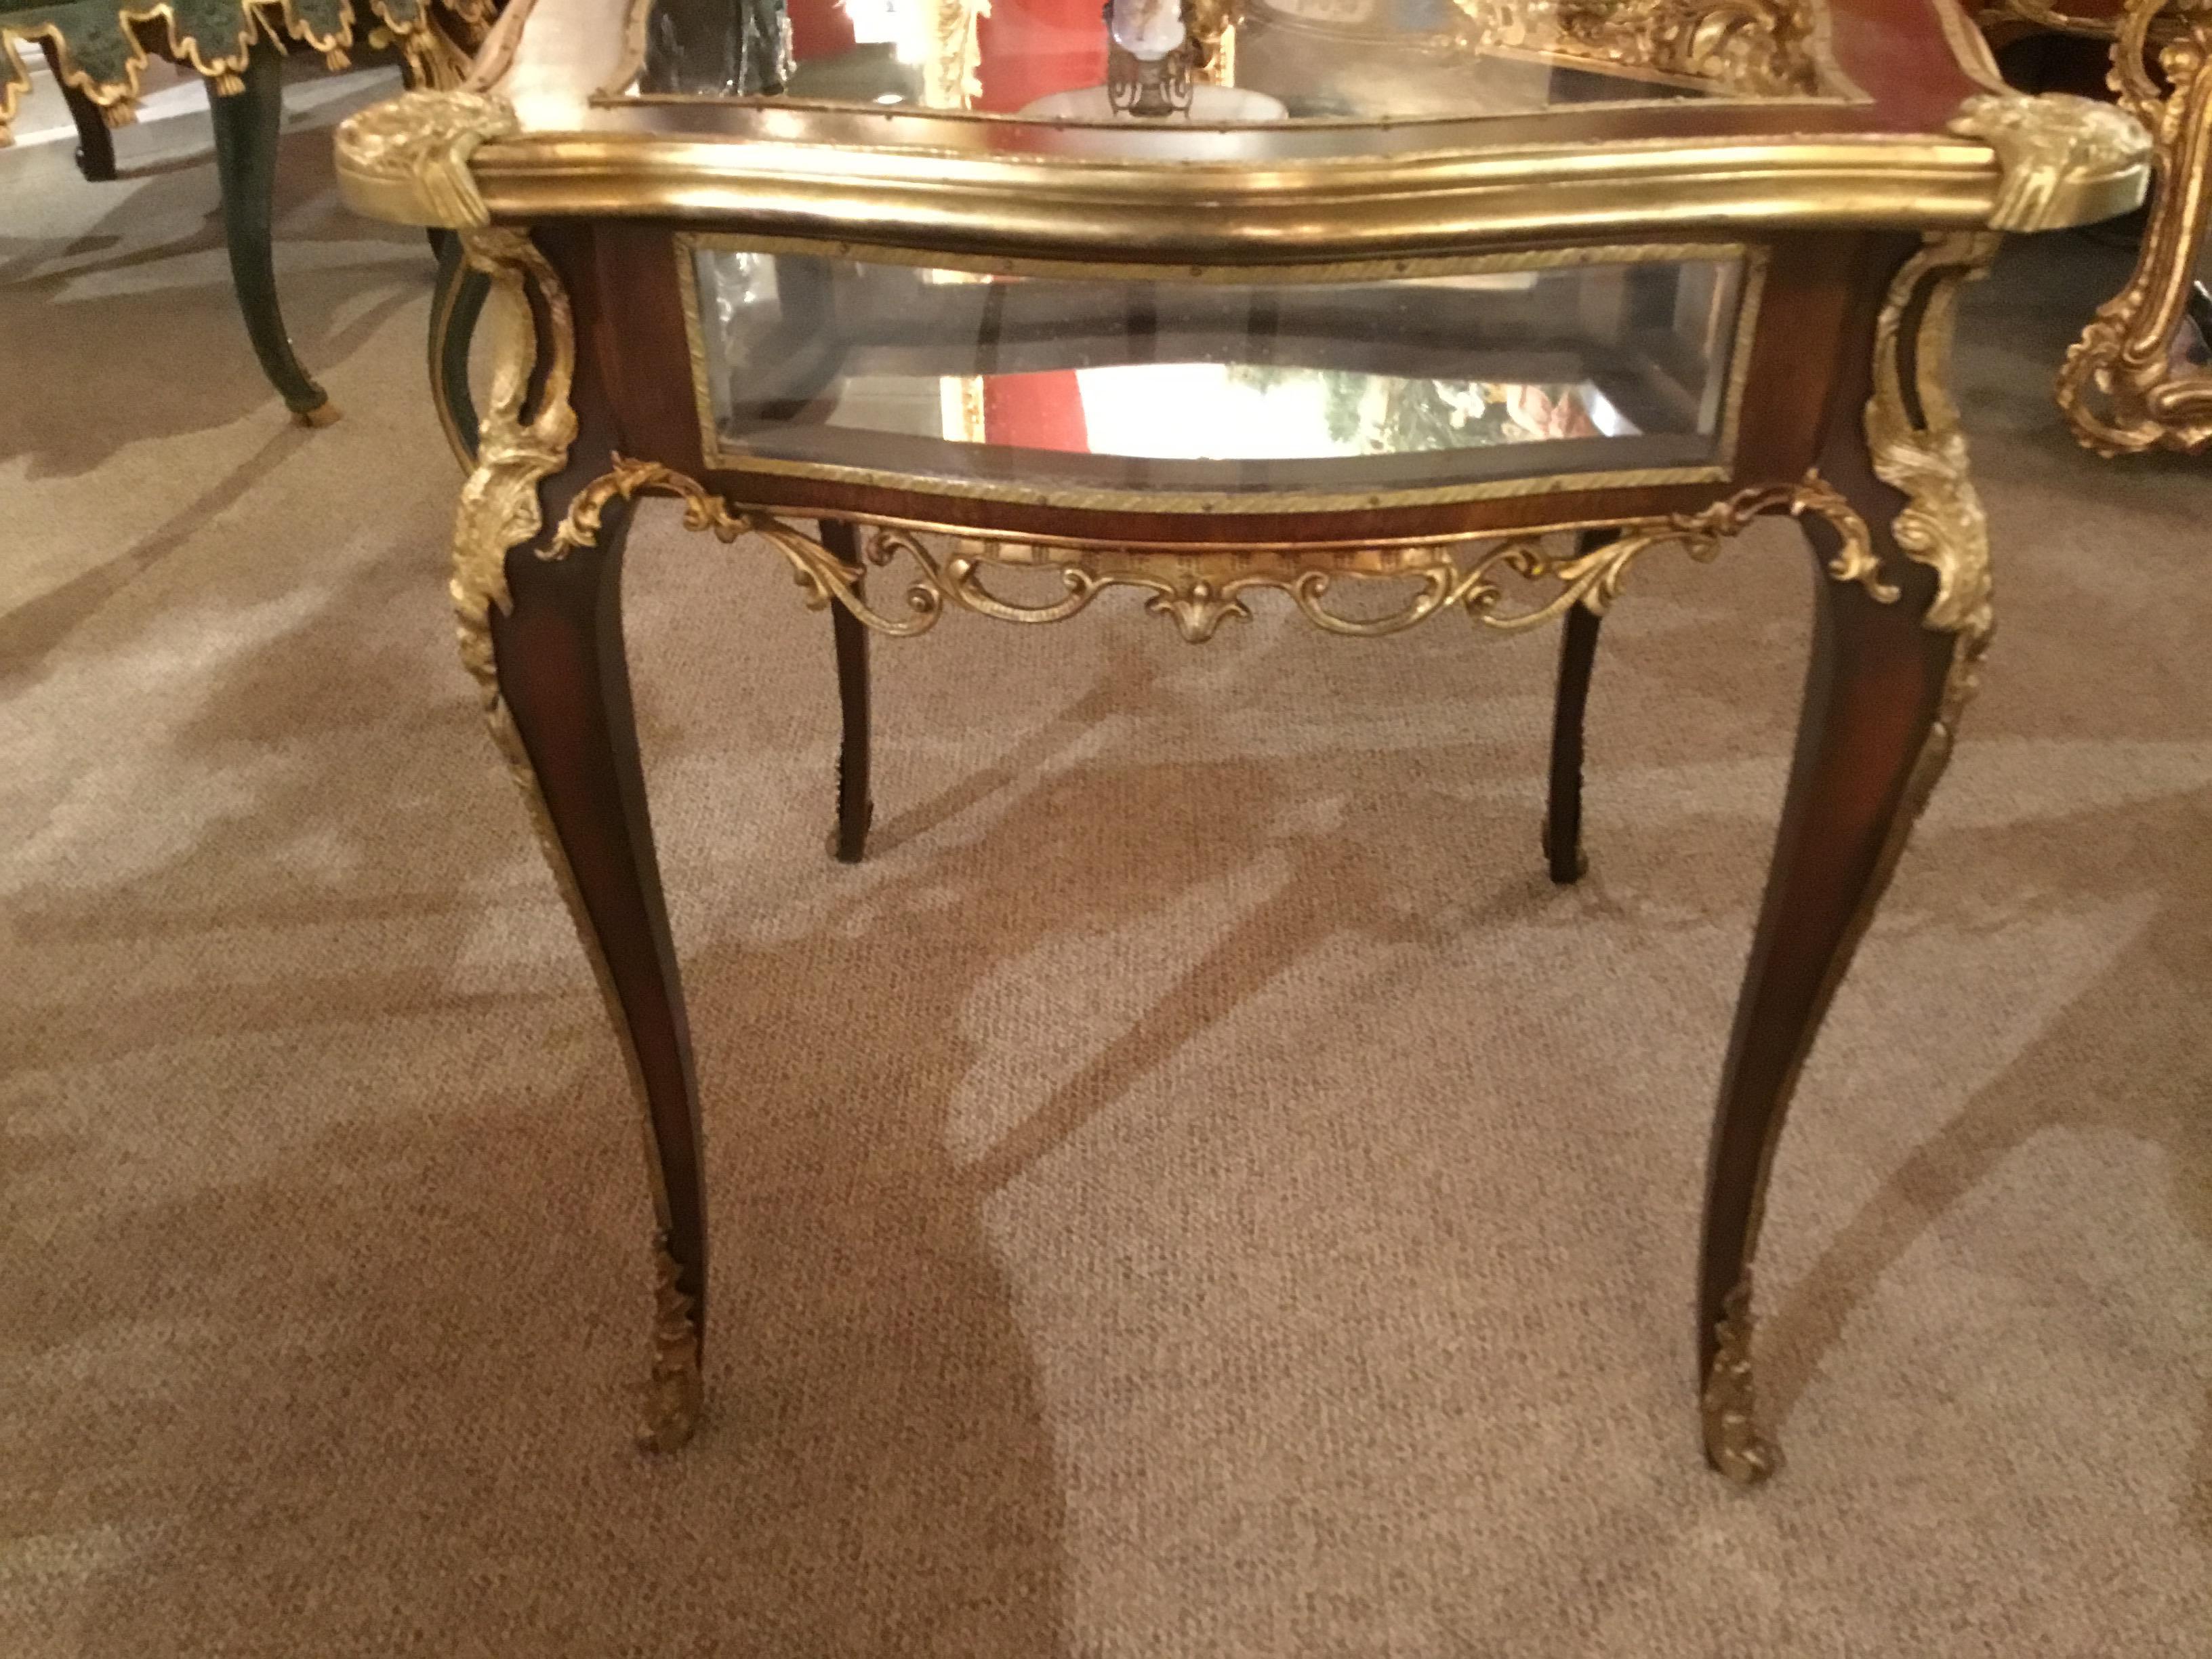 French Louis XV style display table with a glass top for viewing into
The interior with a mirrored bottom. It has a hinged top opening to
The interior for easy placement. Curved panels on the sides, and all
Rising on curved cabriole legs.